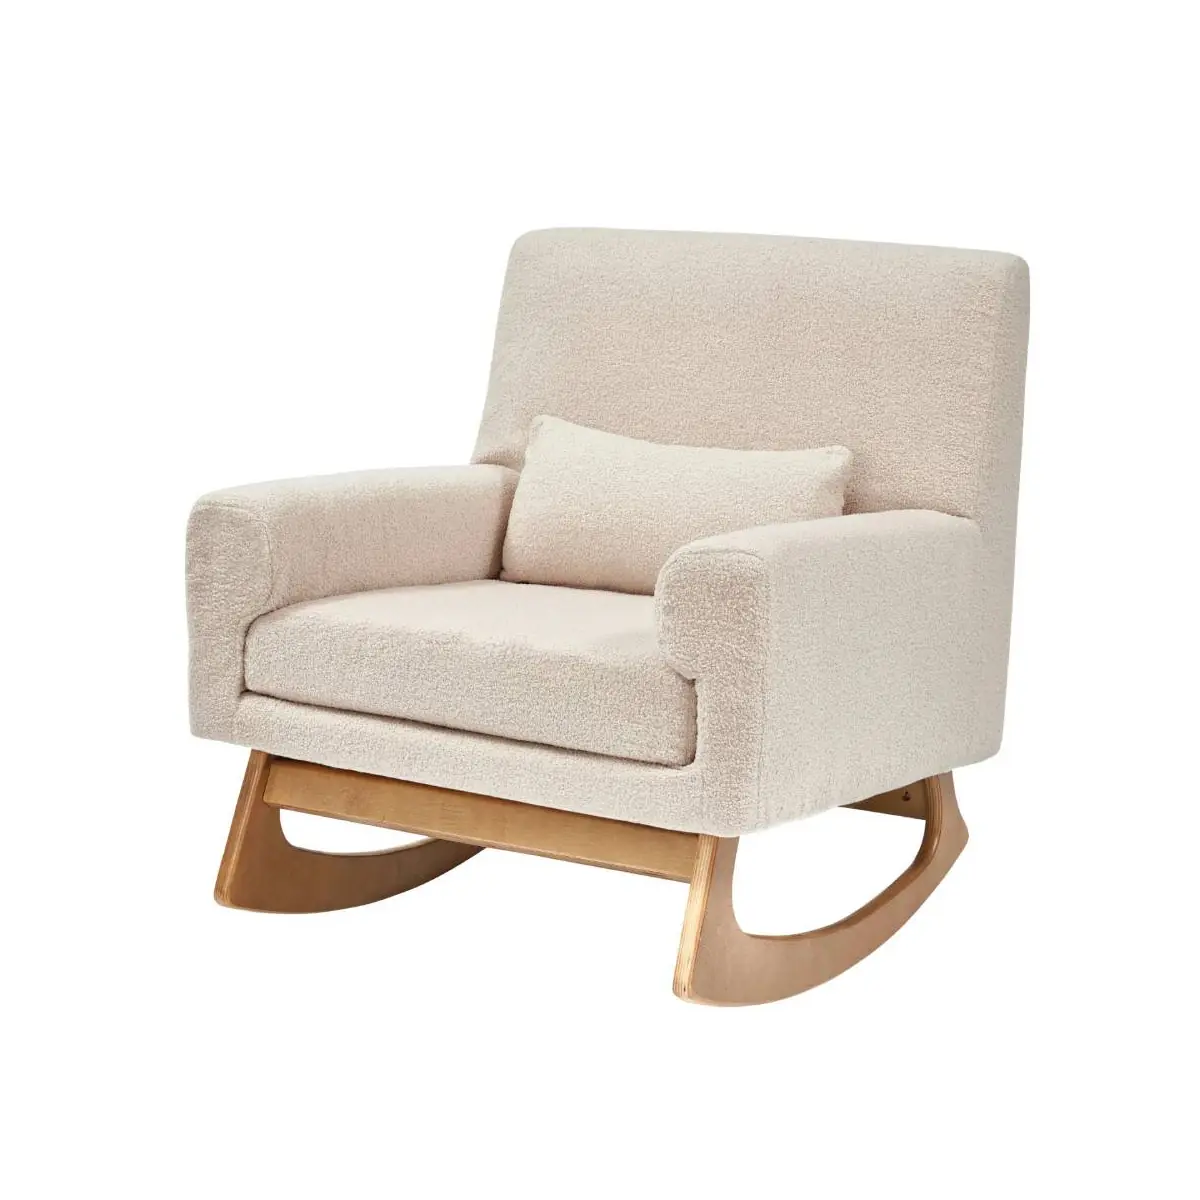 Image of Gaia Serena Boucle Rocking/Feeding Chair - Biscuit Boucle/Oak